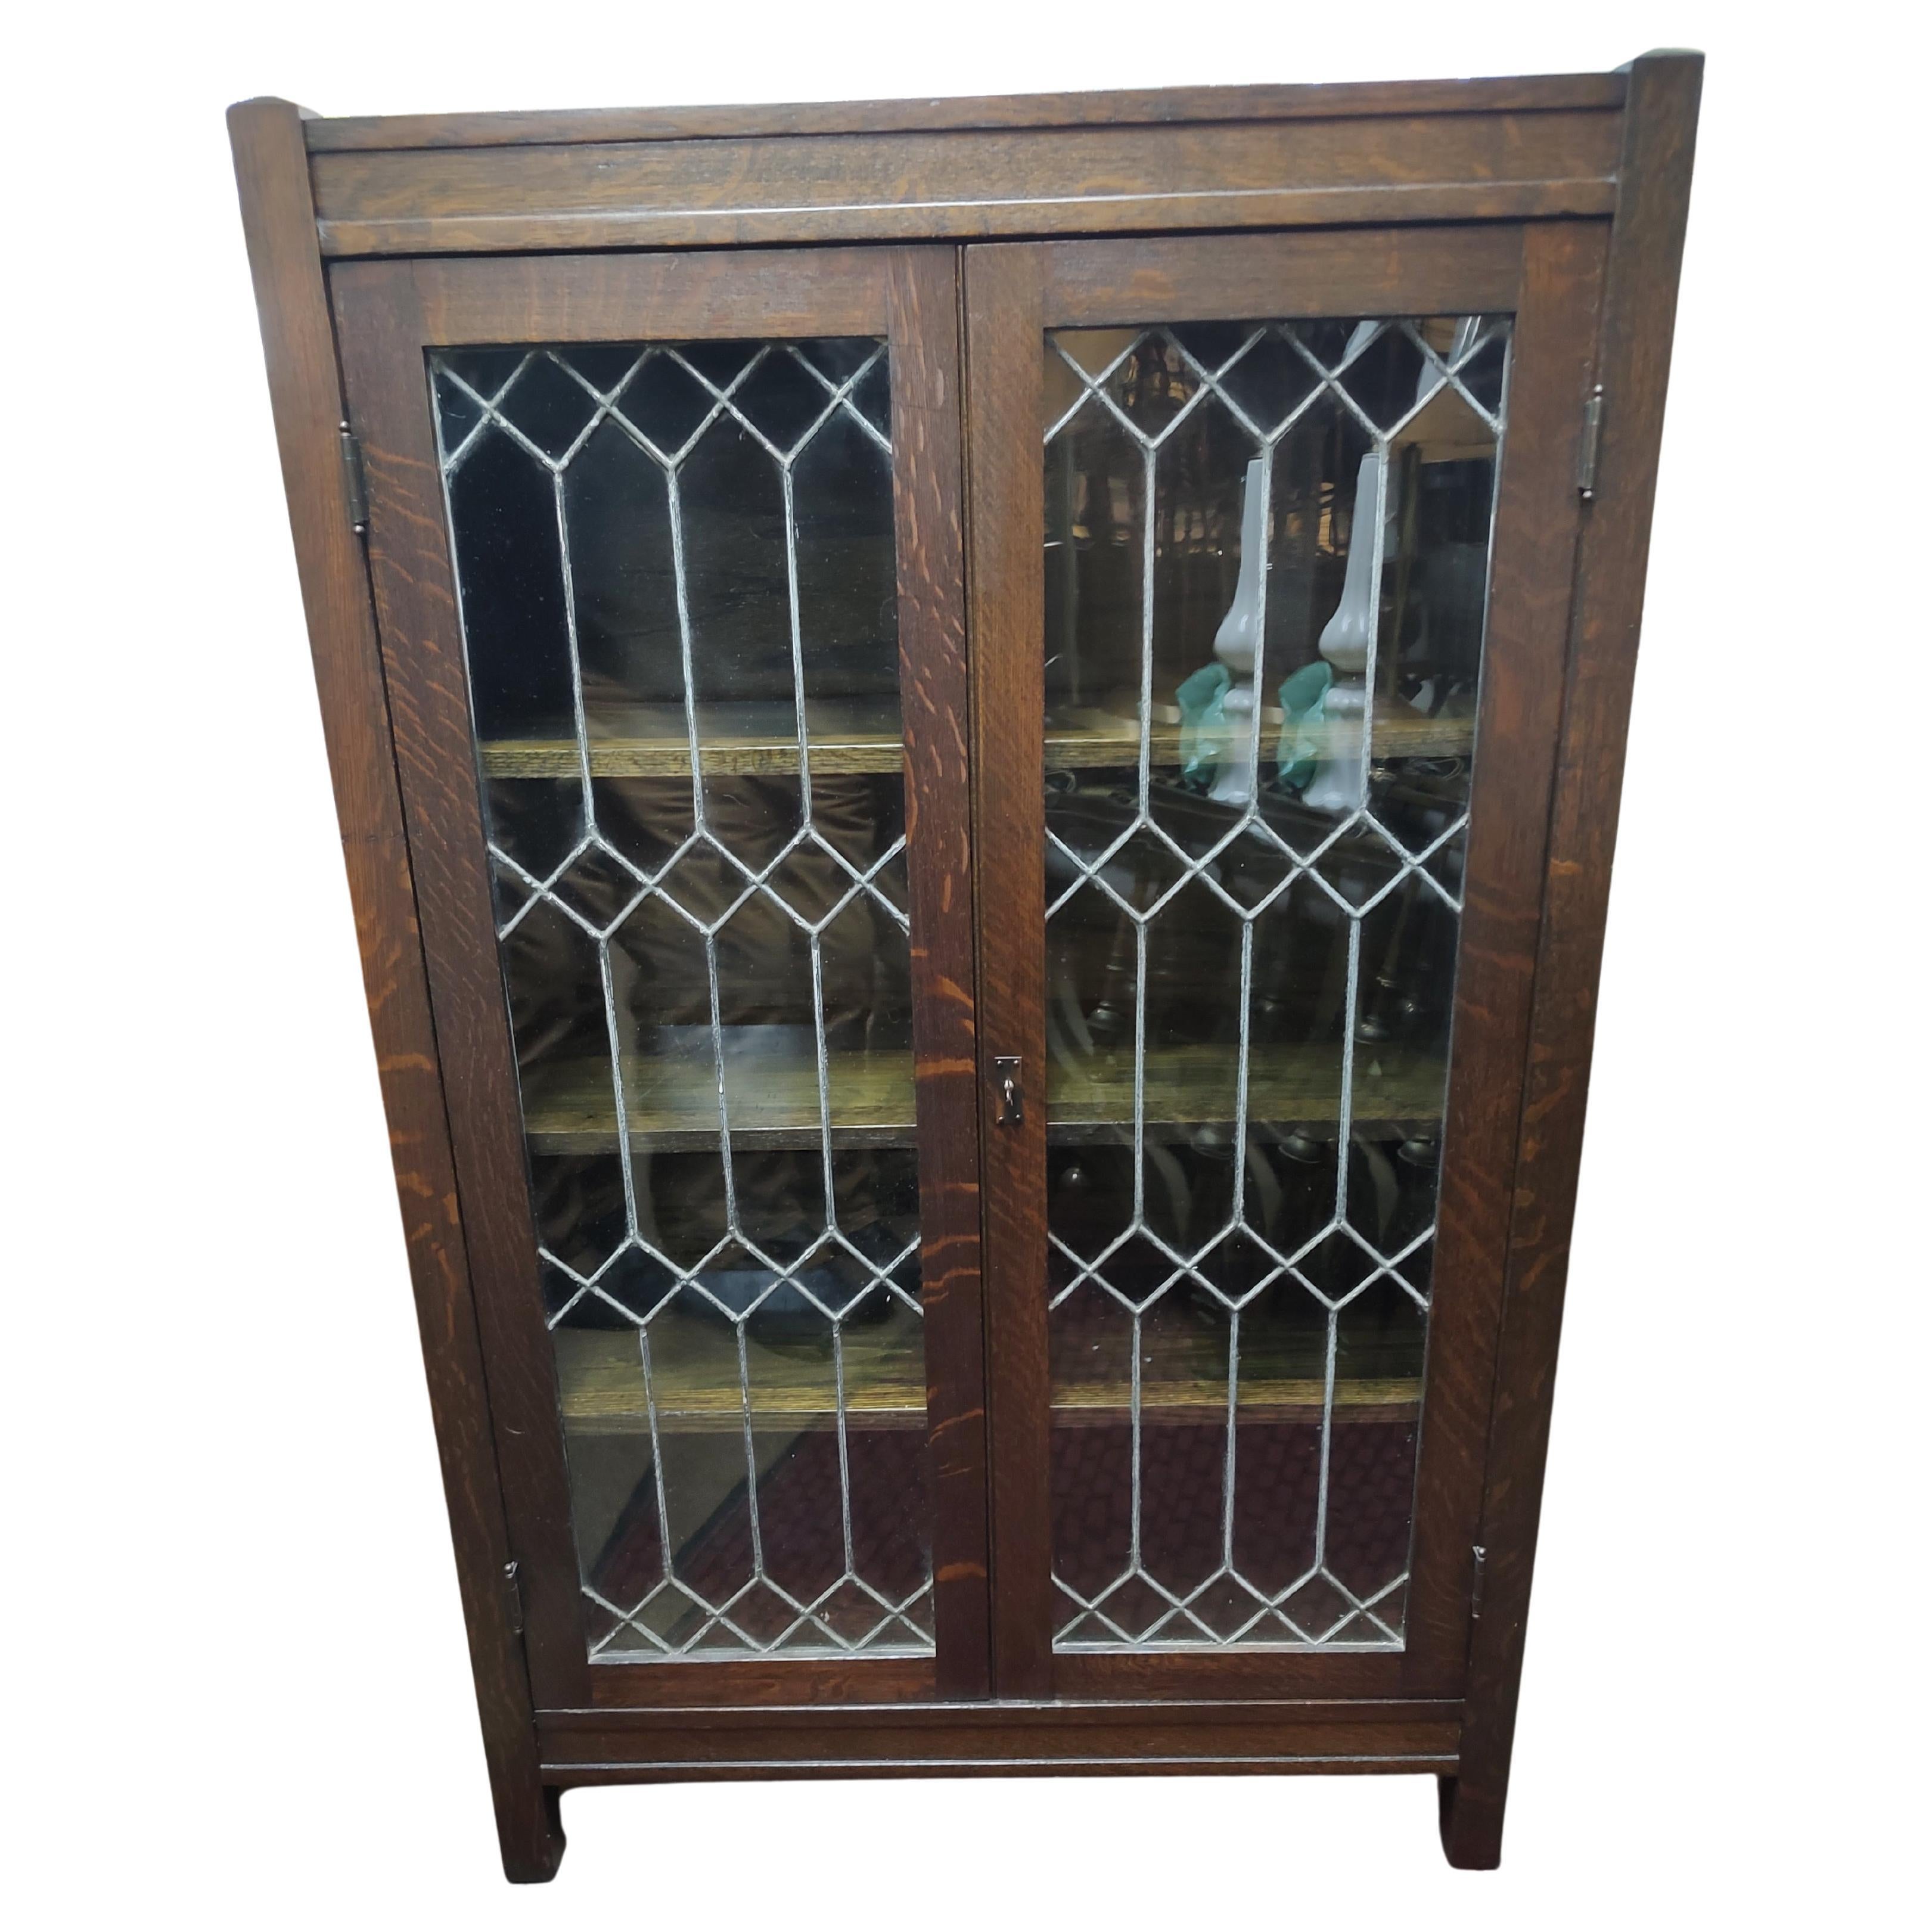 Mission Oak Arts &Crafts Leaded Glass Bookcase C1912 In Good Condition For Sale In Port Jervis, NY